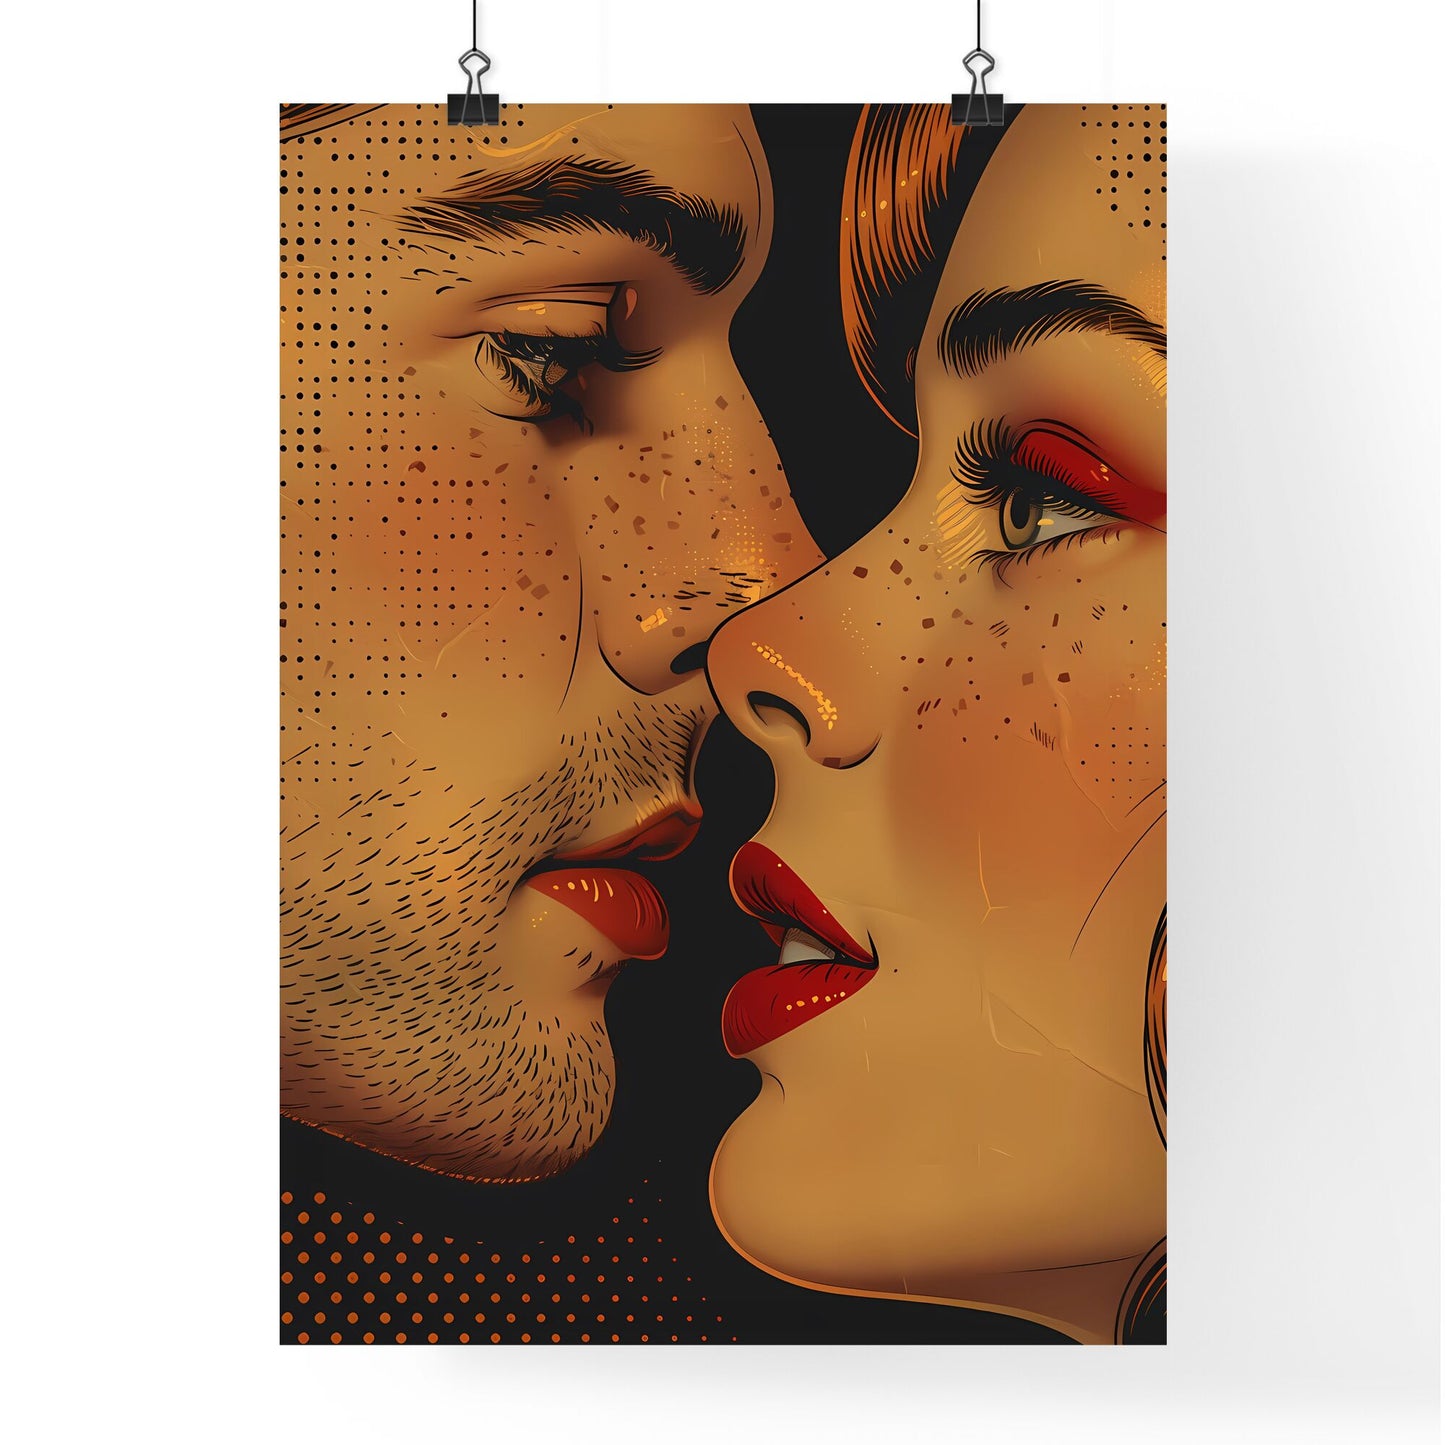 Comic Strip Comic Book Girl Kissing, Tattoo Artwork, Distinct 1970s Style, Vibrant Retro Painting with Textured Halftone Effects, Yellow & Black Default Title